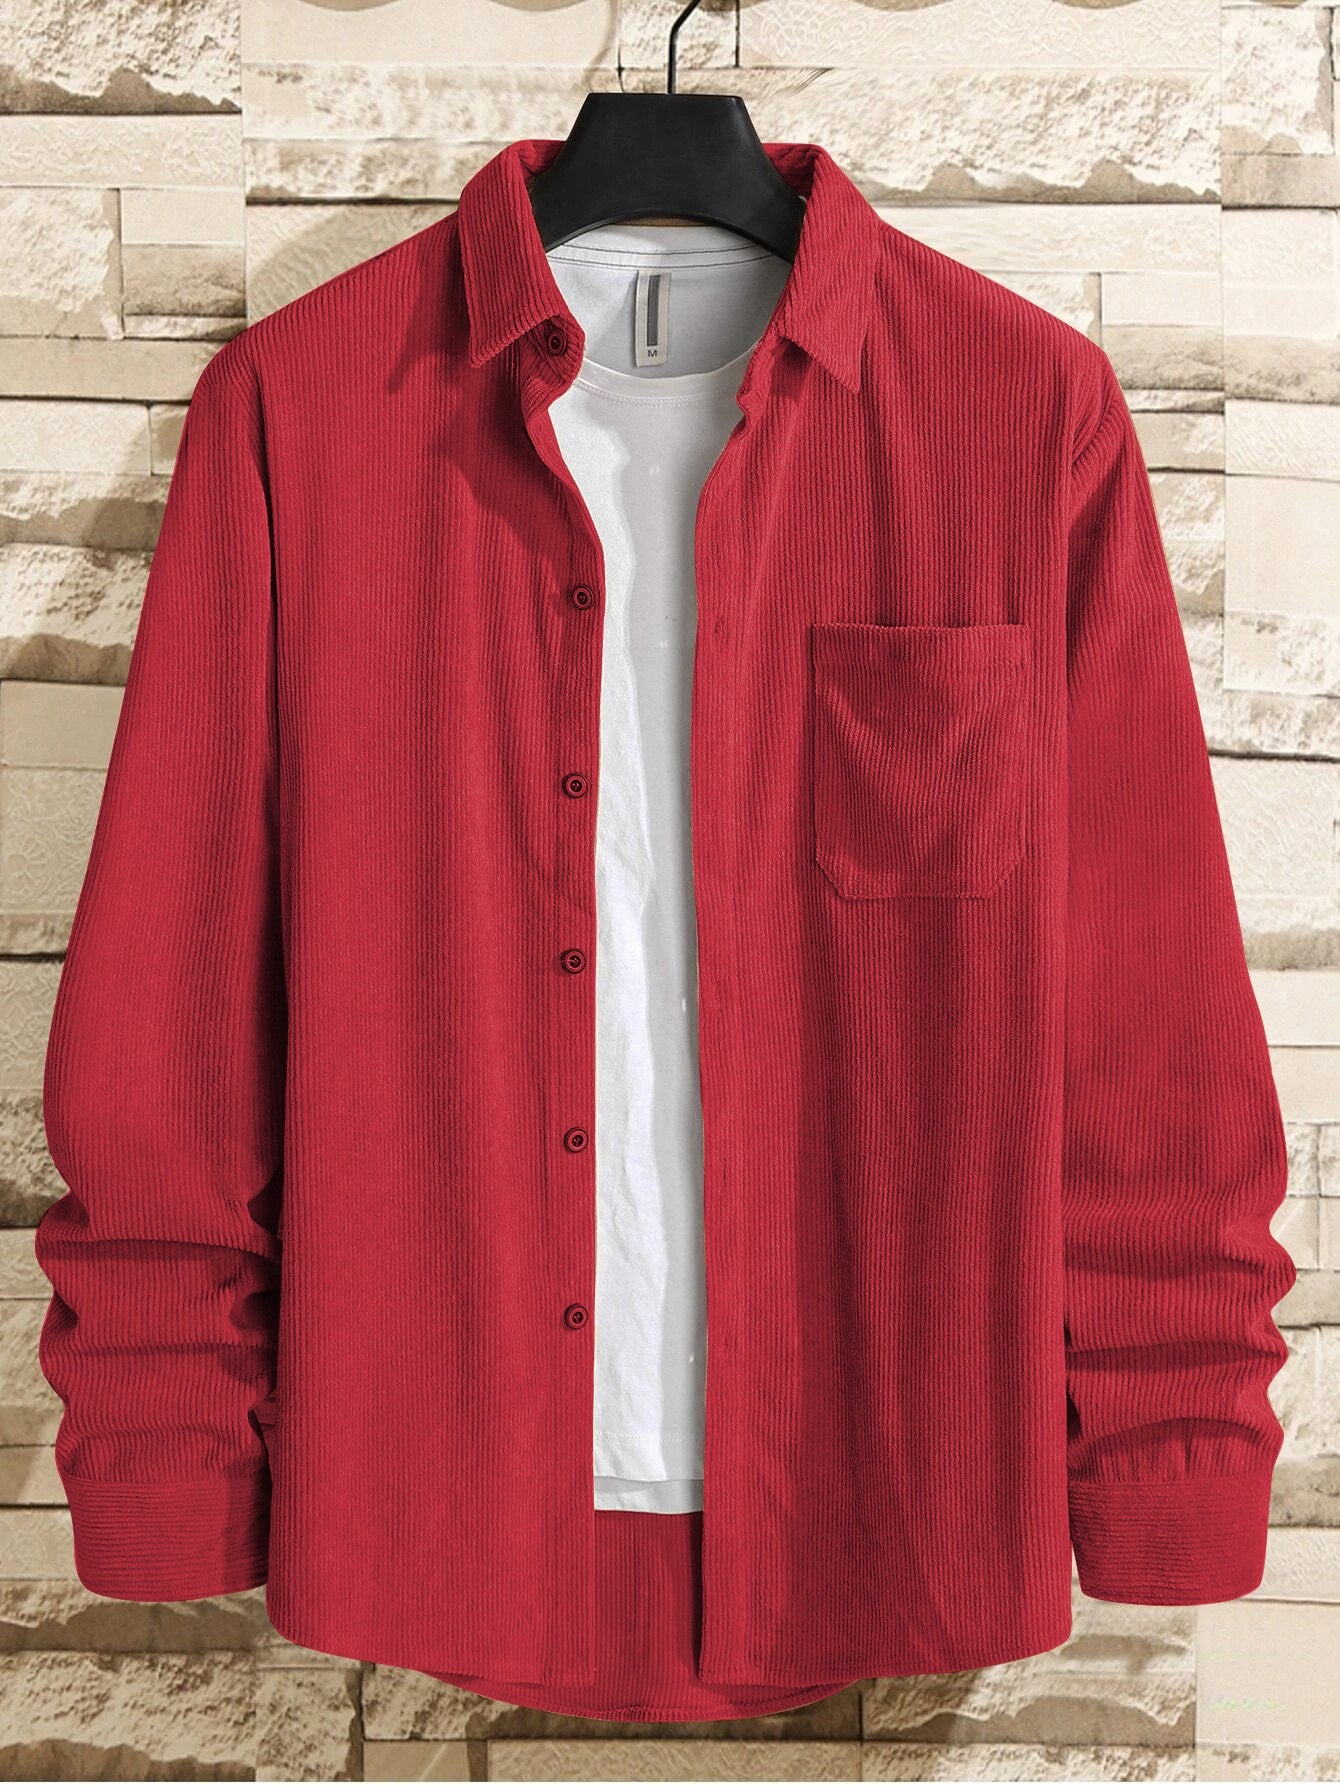 Charming Red Men Corduroy Solid Shirt With Pocket